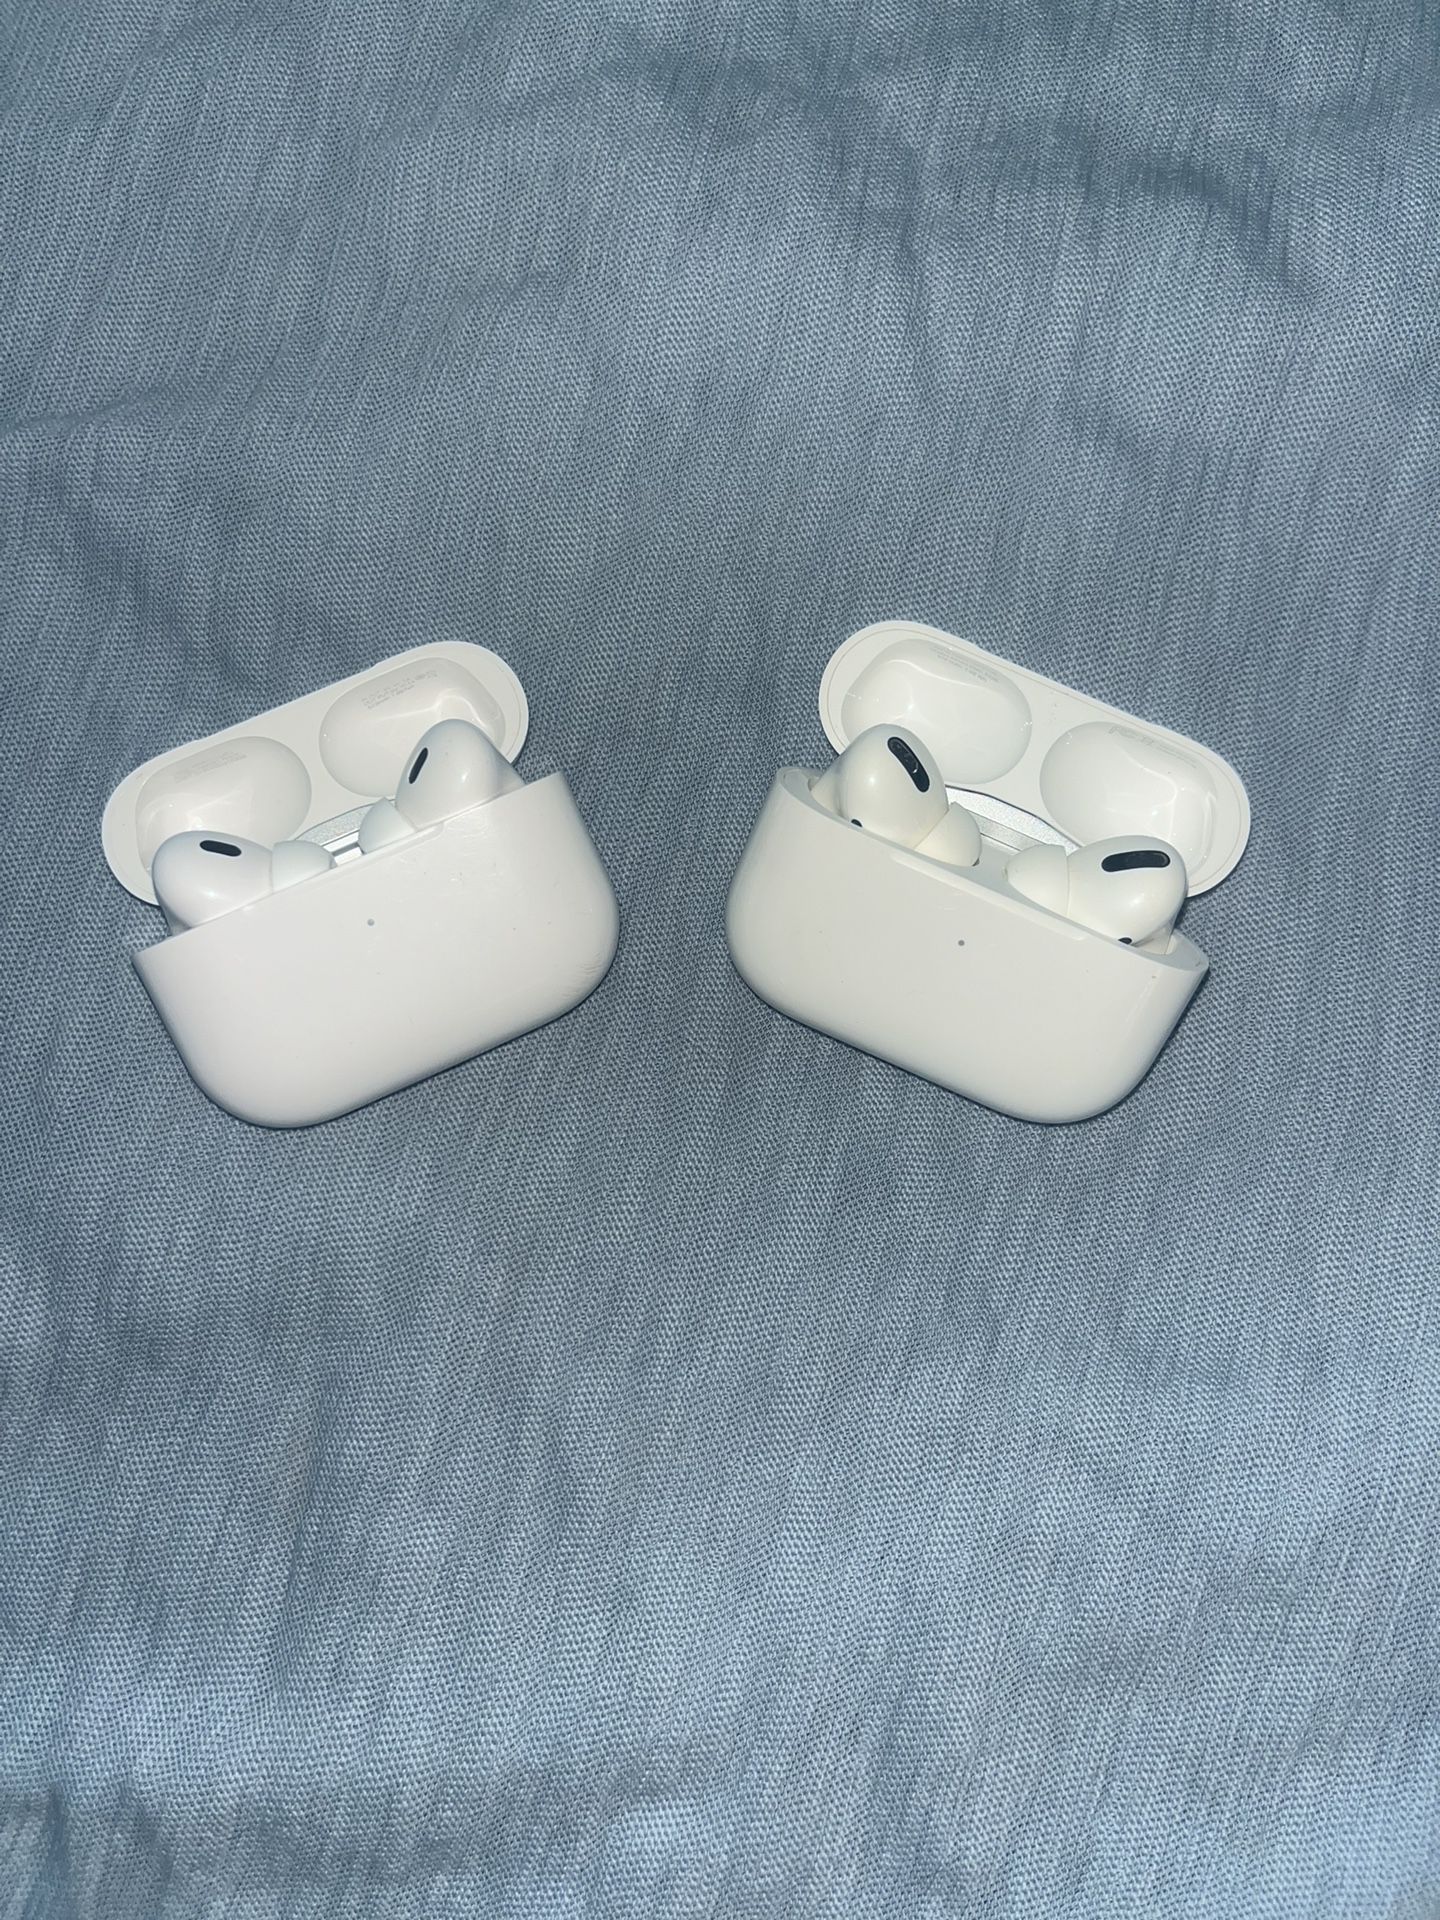 Two Apple  AirPods Pro (2nd generation) with MagSafe Case - White 